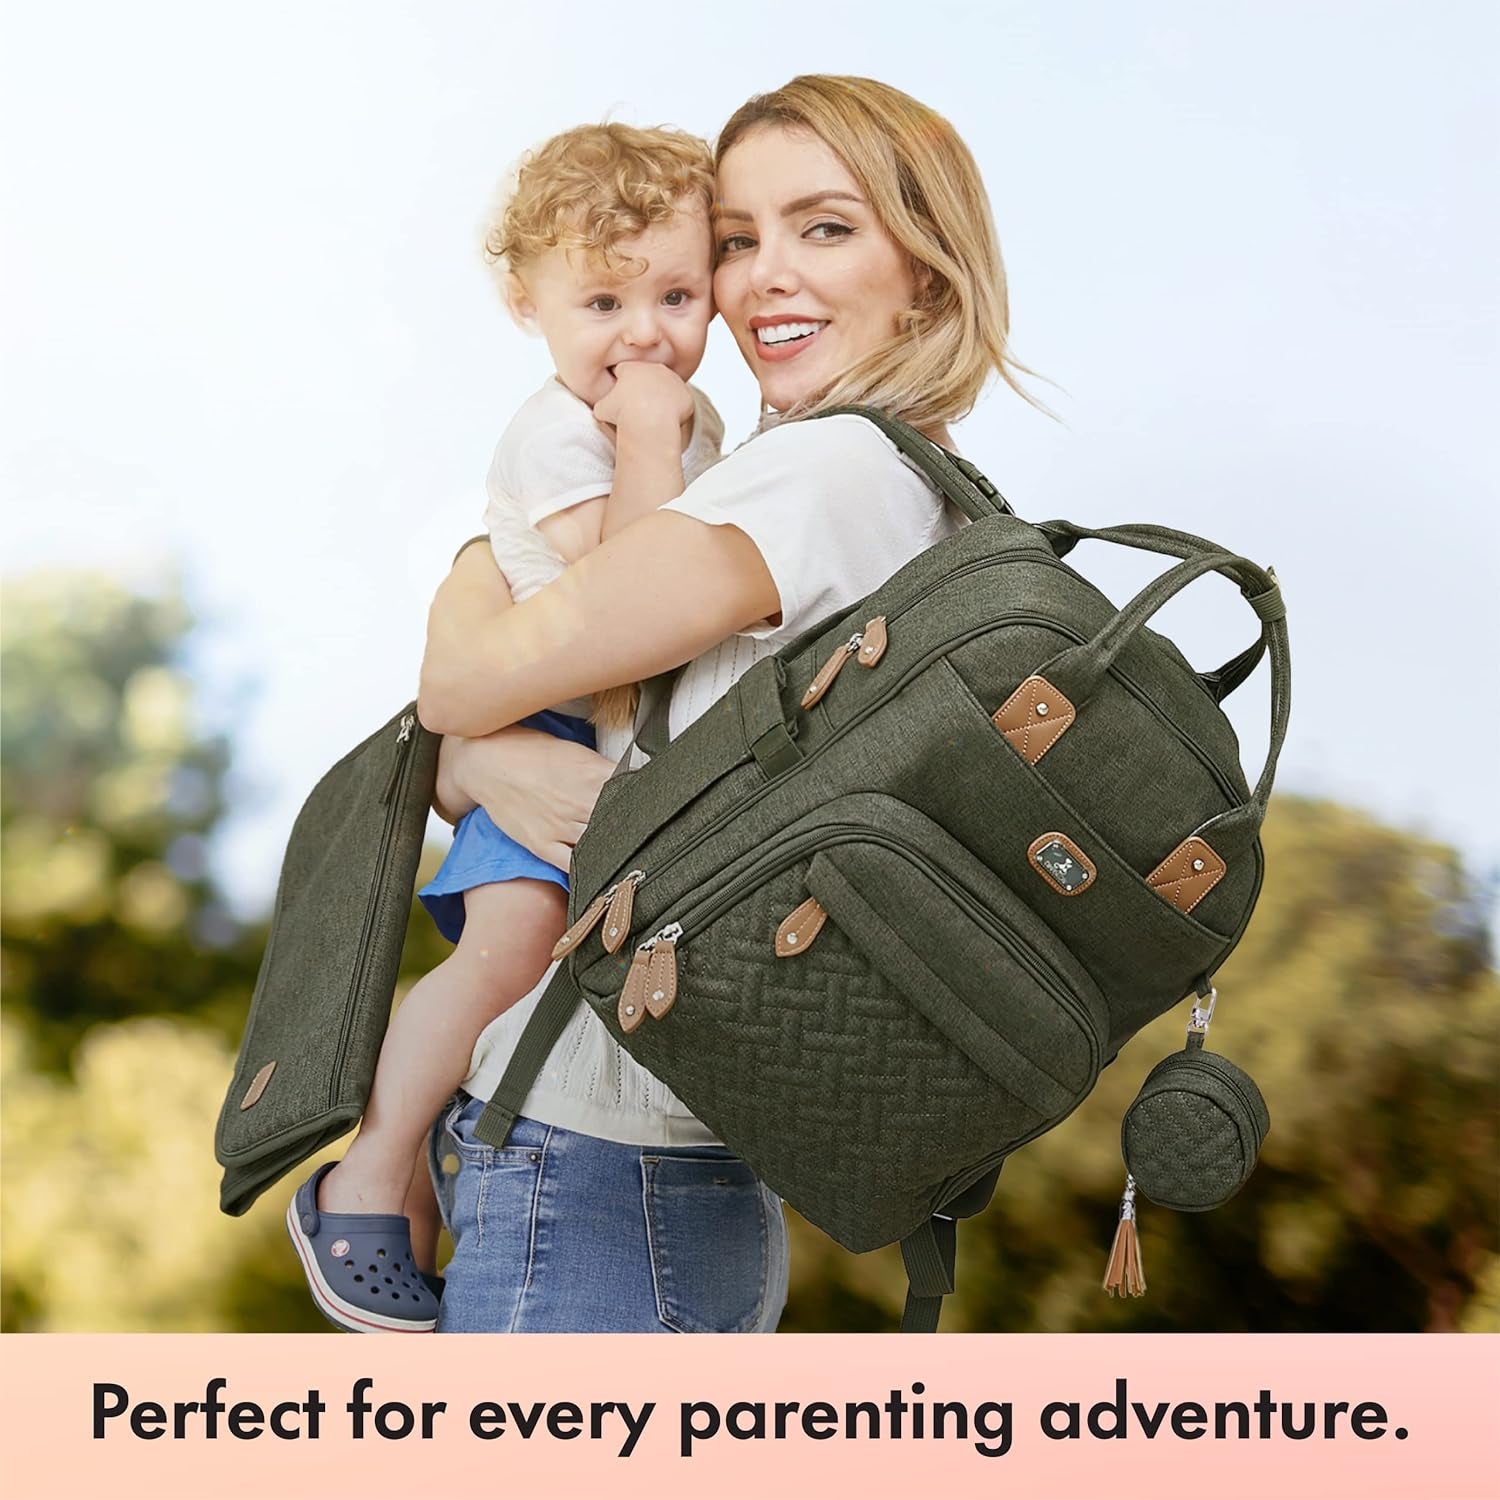 Diaper Bag Backpack with Portable Changing Pad, Pacifier Case and Stroller Straps, Large Unisex Baby Bags for Boys Girls, Multipurpose Travel Back Pack for Moms Dads, Army Green